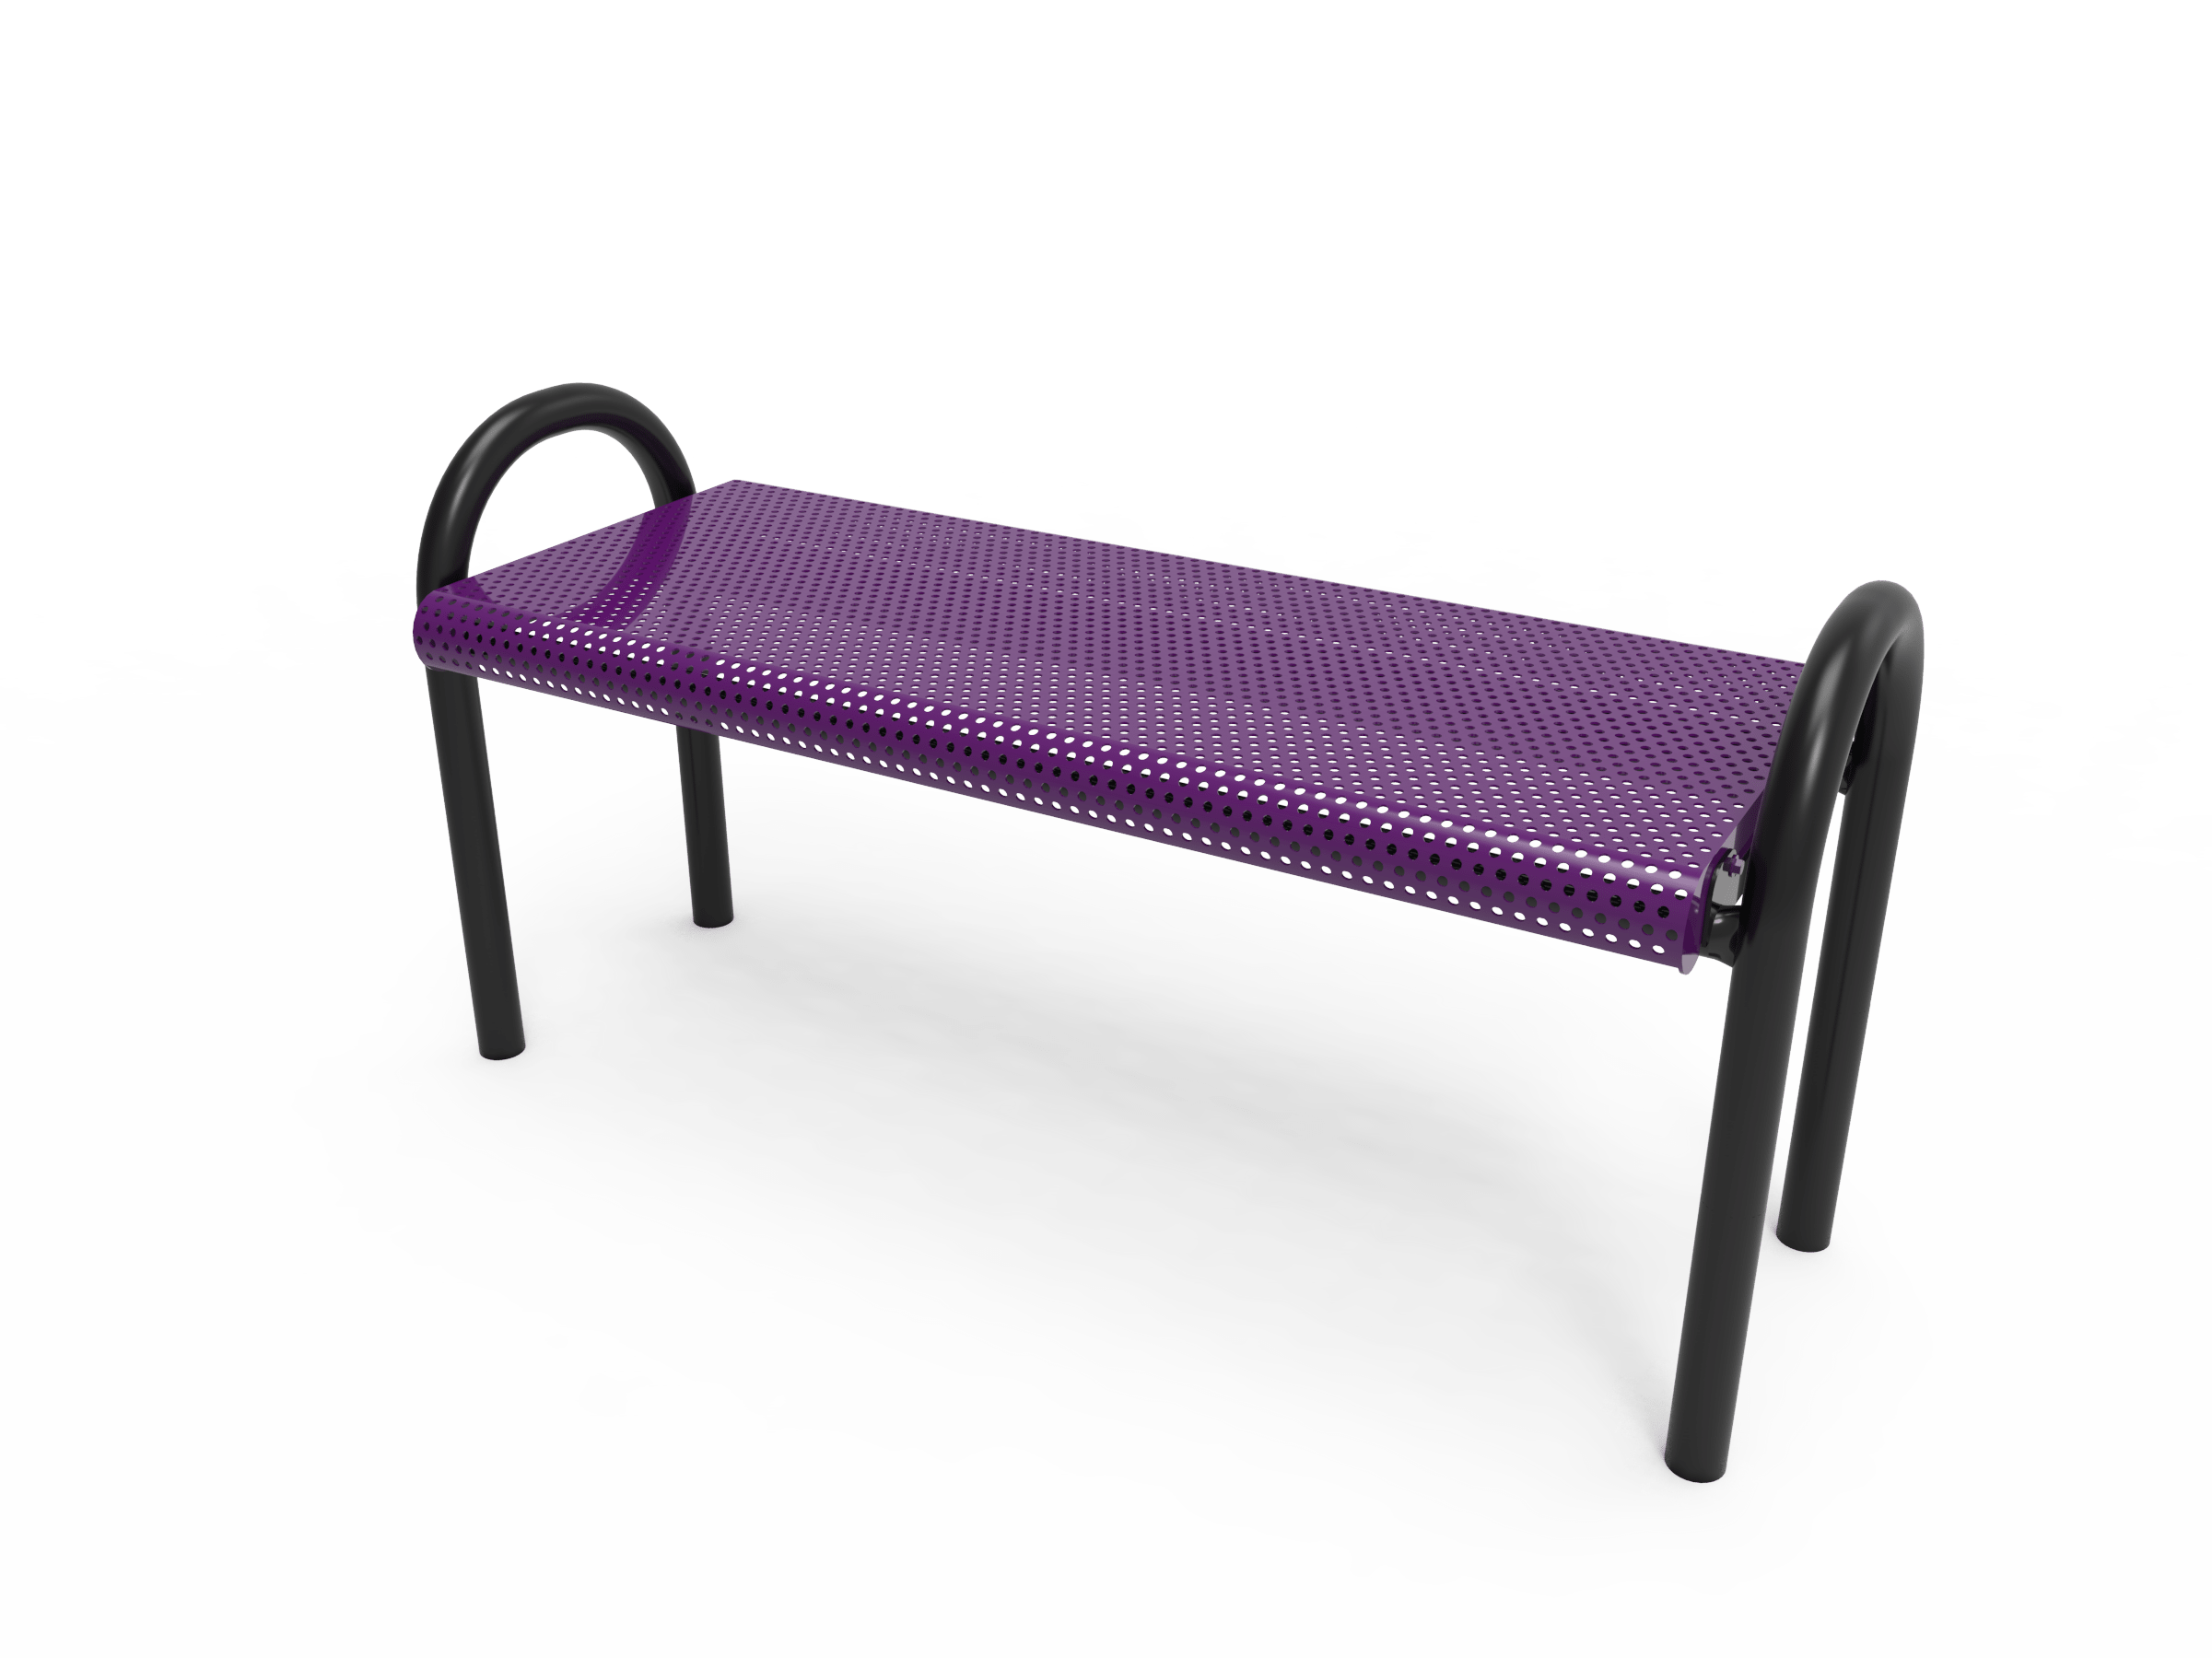 4′ Bench Without Back In Ground-Punched
BMD04-D-59-000
Industry Standard Finish
$1059.00
BMD04-B-59-000
Advantage Premium Finish
$1319.00
